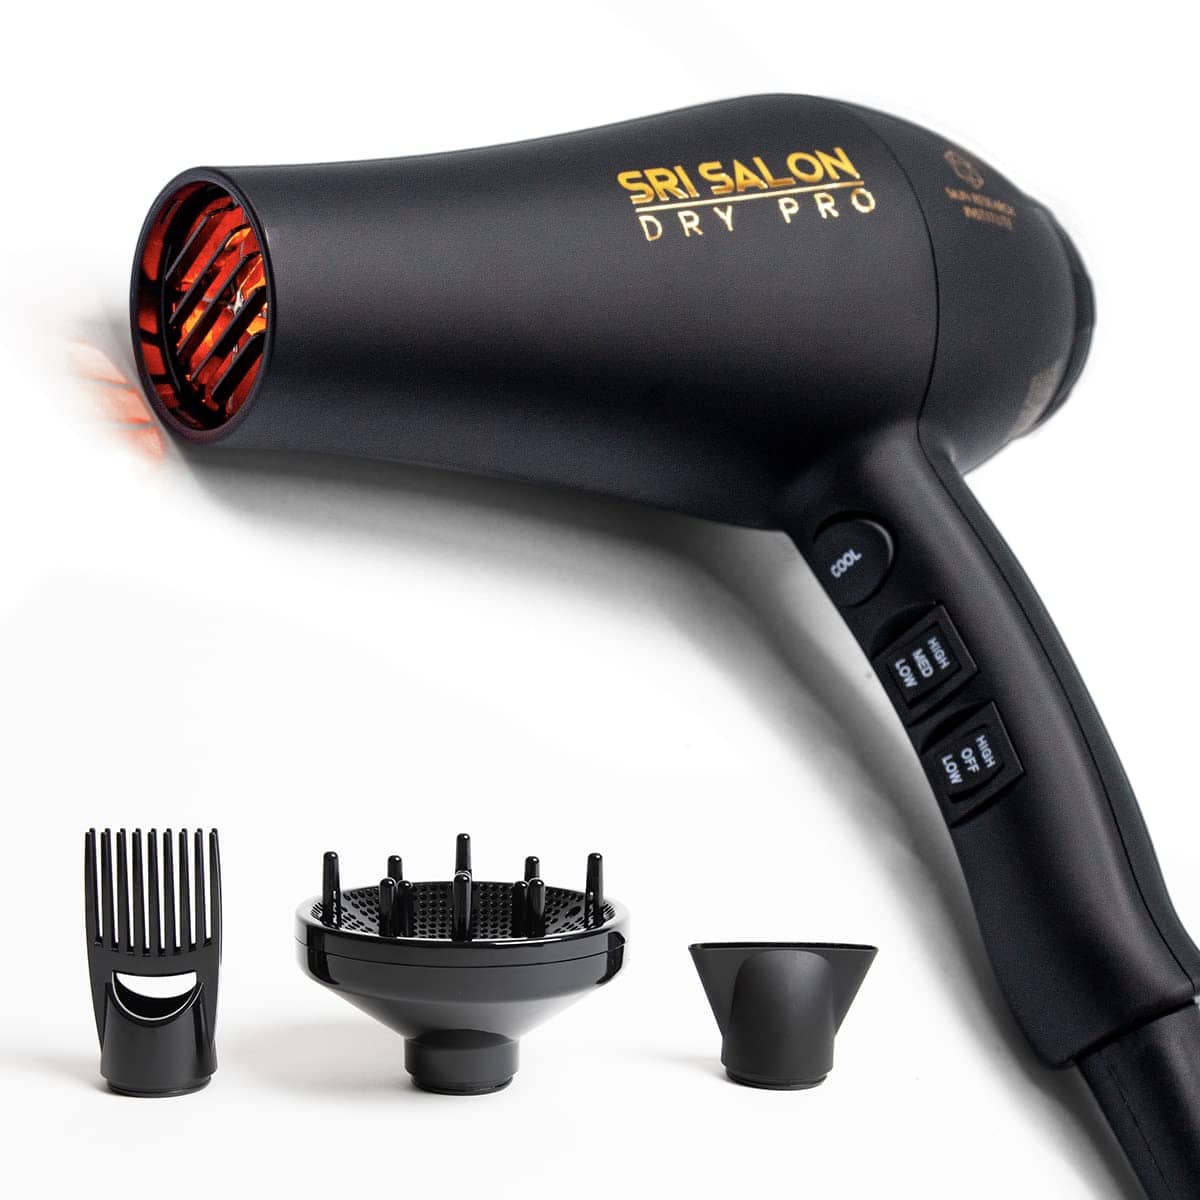 SRI Salon Dry Pro, Infrared Light Blow Dryer with Salon Results, Negative Ions for Reduced Frizz, Fast-Drying & Max Shine, 1875W, Free Attachments